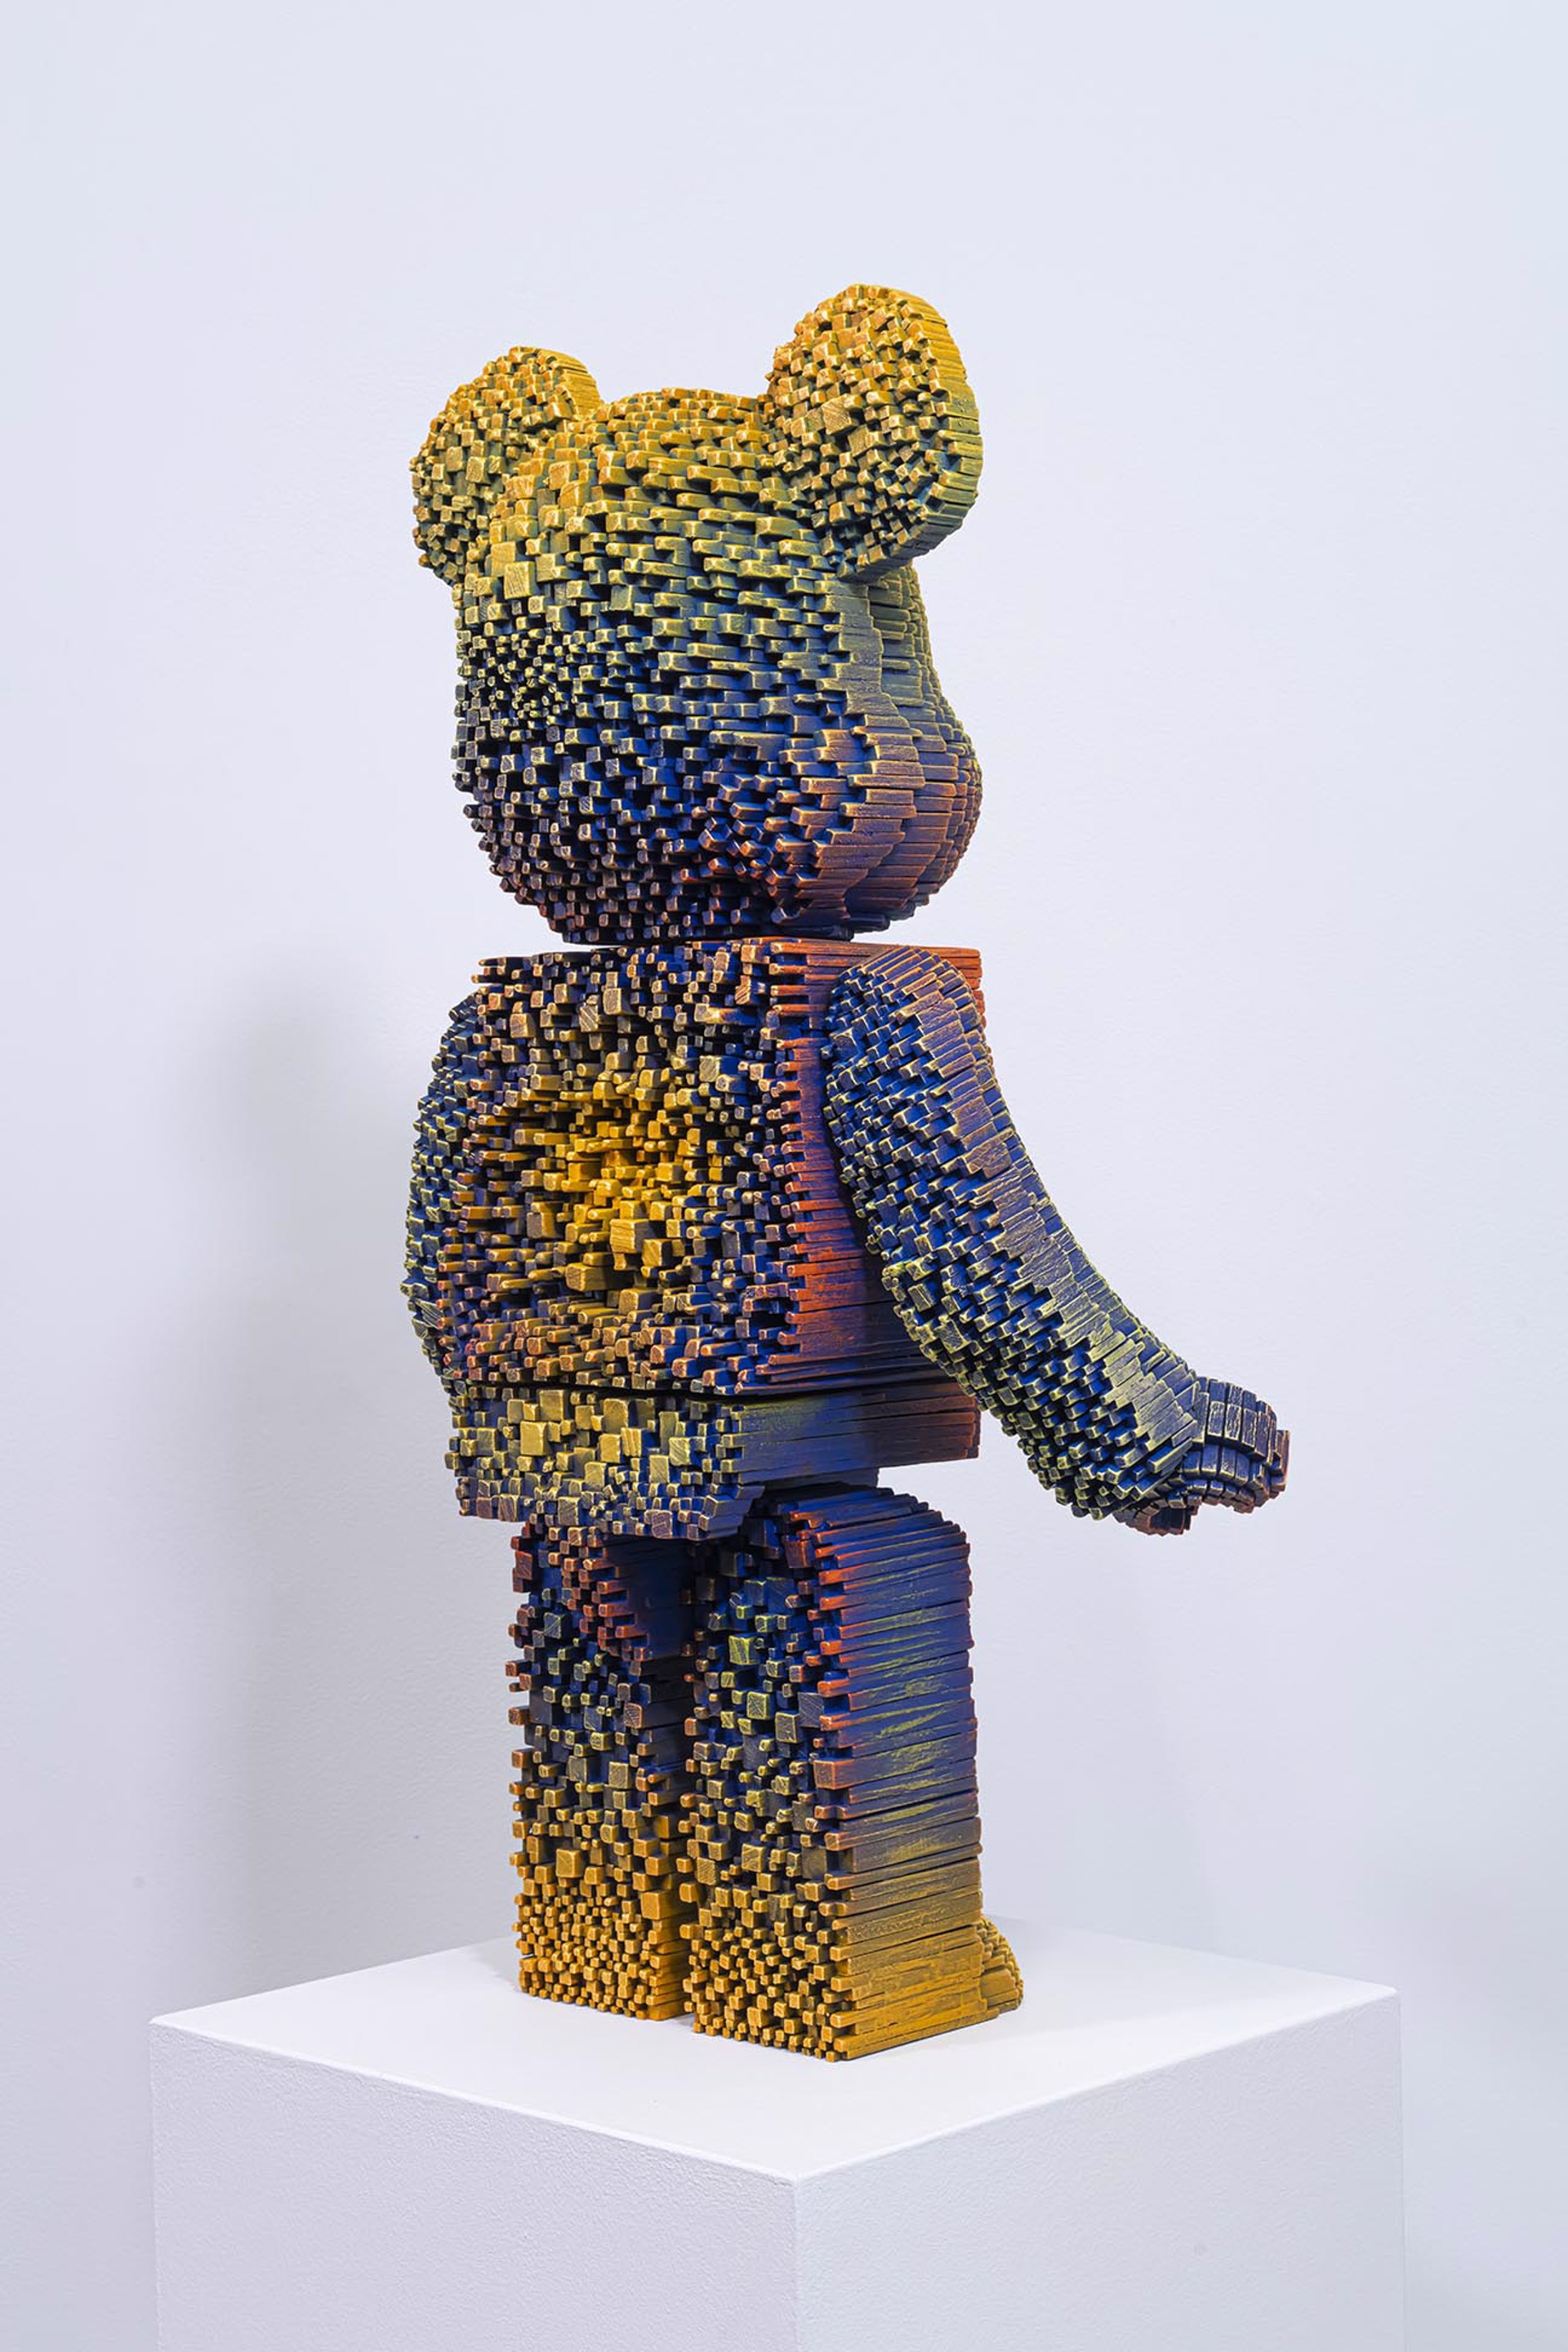 Bearbrick Commission by Gil Bruvel